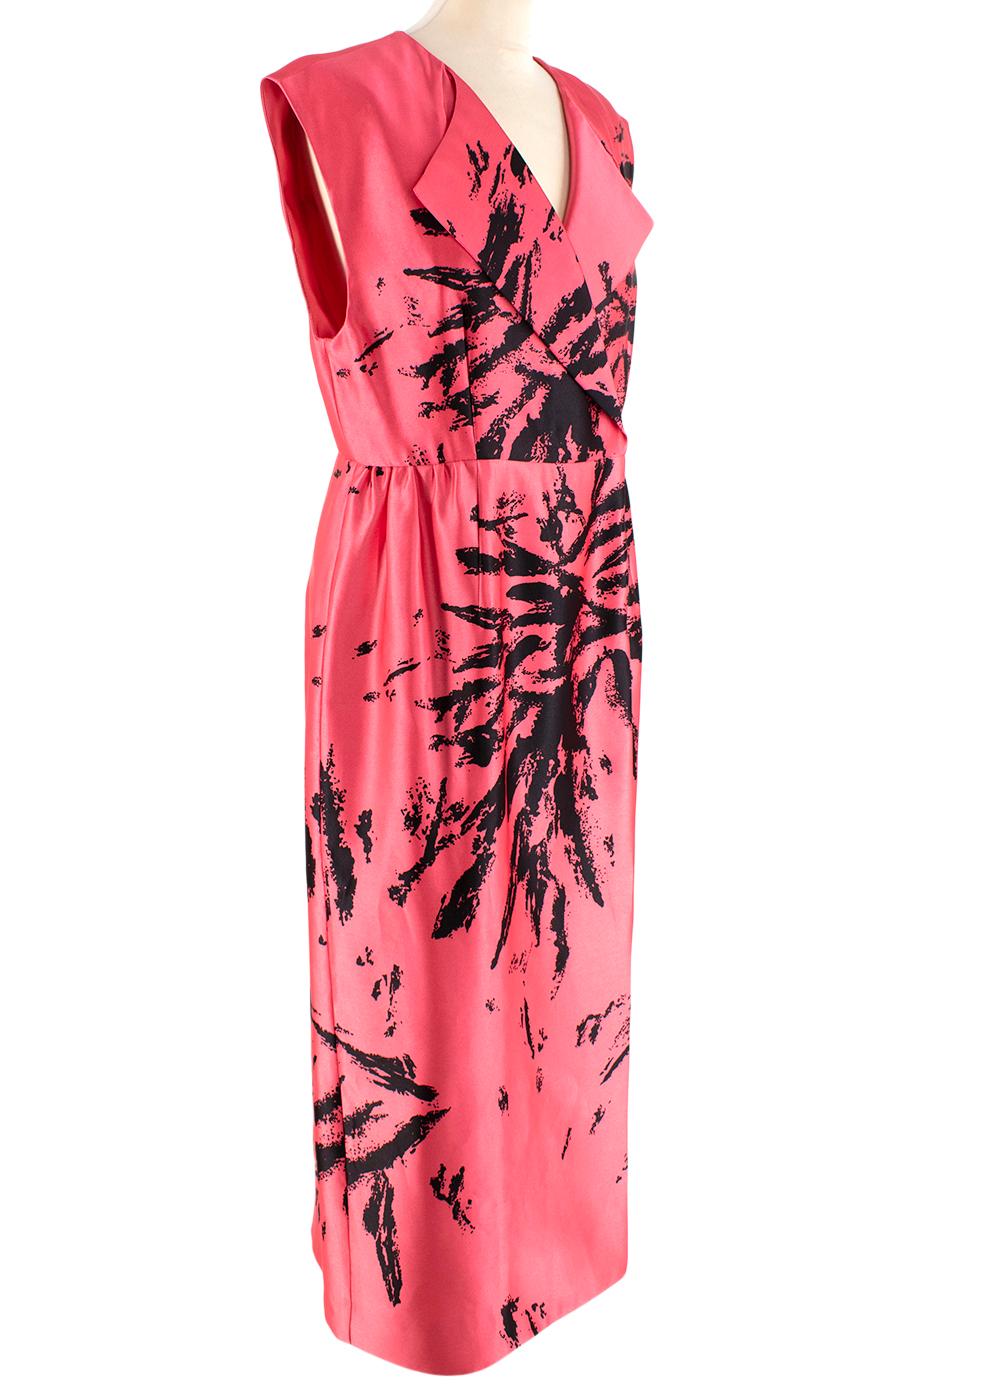 Miu Miu Grapefruit Pink Printed Wrap Dress

 - Grapefruit-pink and black printed silk.
- fully lined
- single vent to the back
- Concealed hook and snap fastenings at wrap front
- Wide Lapels
- Sleeveless  
- V-Neck

Material: 
100% silk 
Lining: